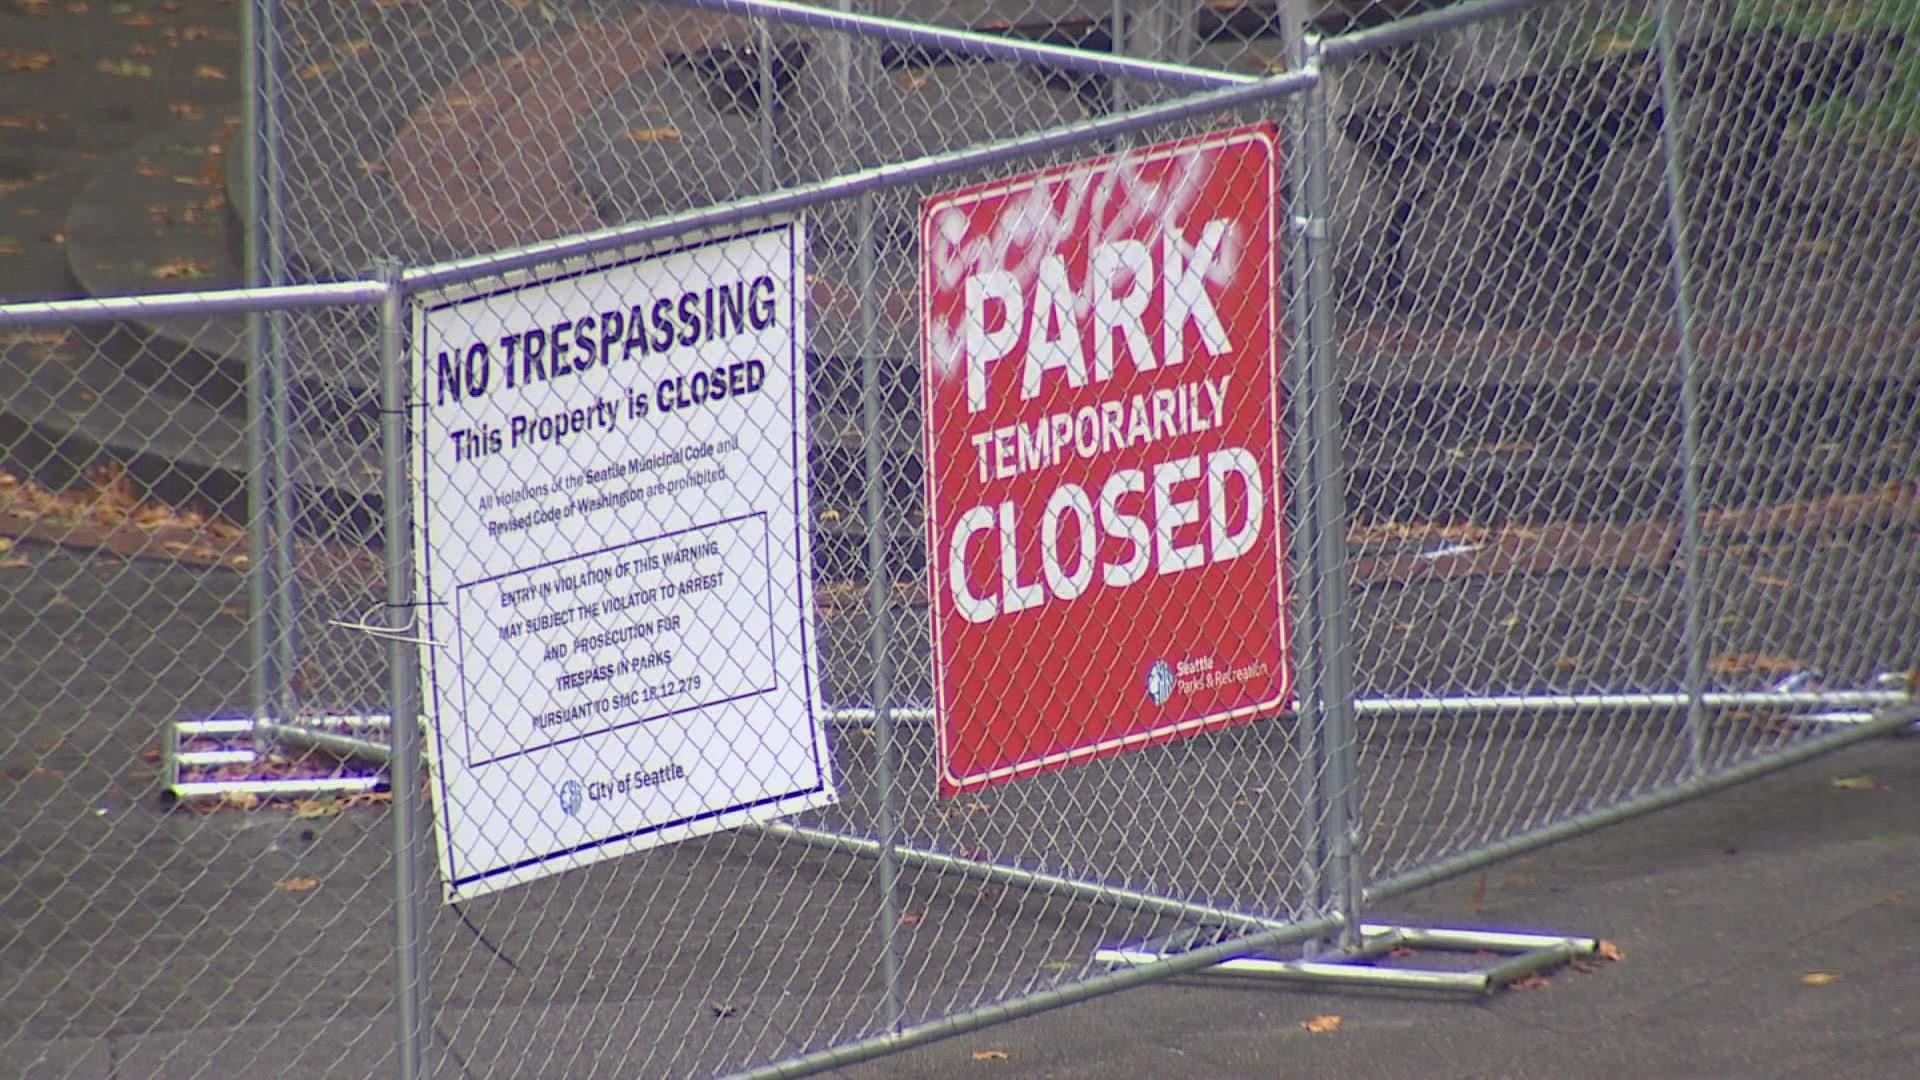 The park has been plagued with violence and crime and courthouse workers have expressed concern about their safety for years.